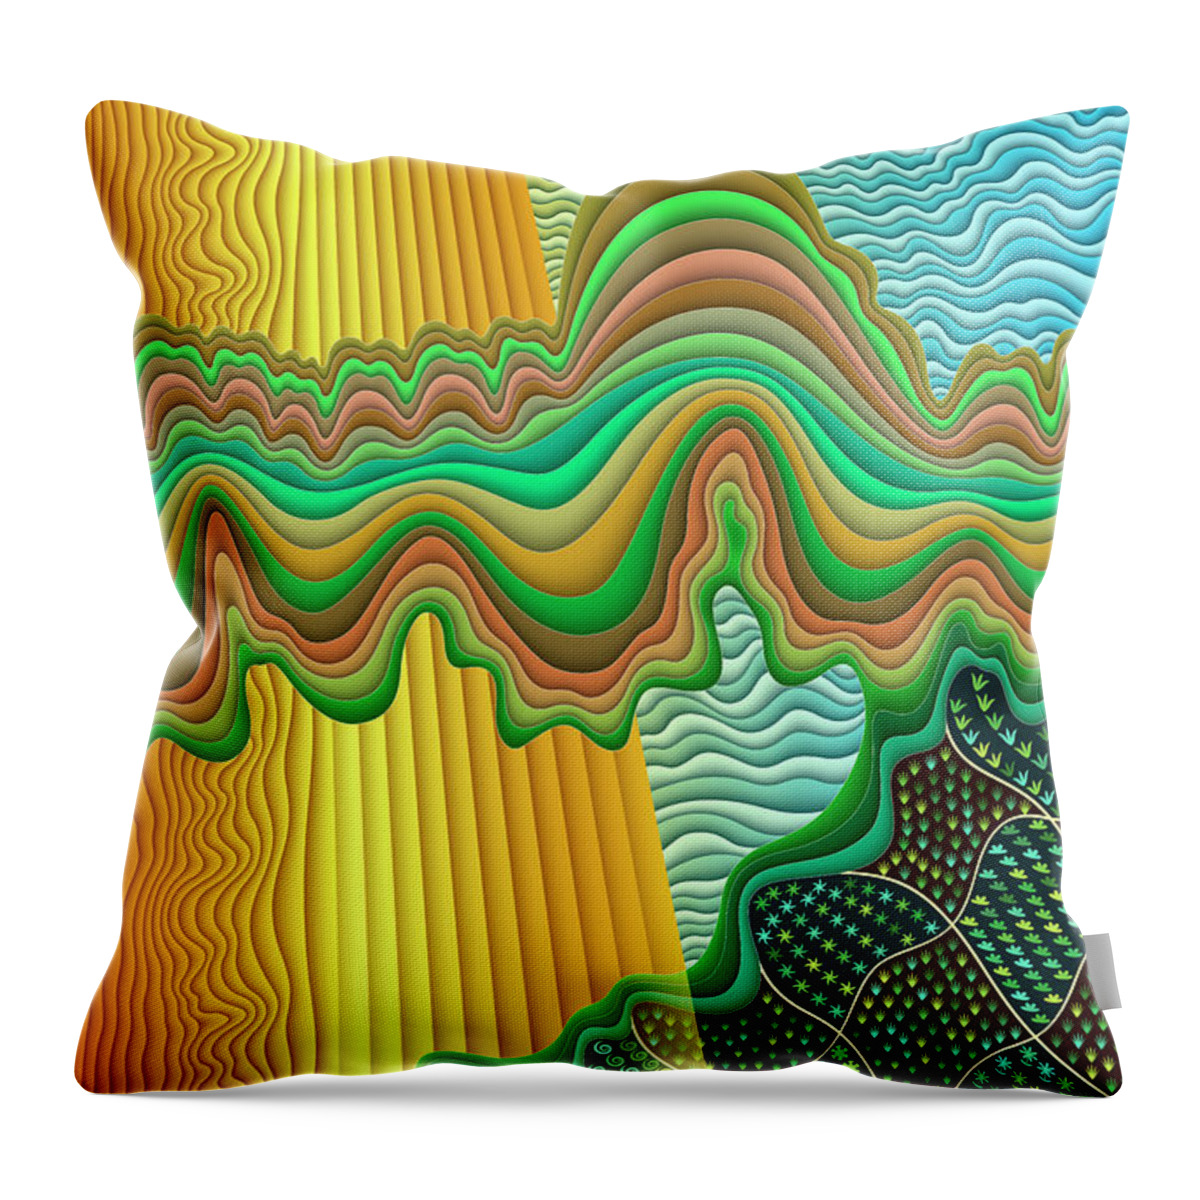 Imaginary Lands Throw Pillow featuring the digital art Wrinkled Hills Farm by Becky Titus